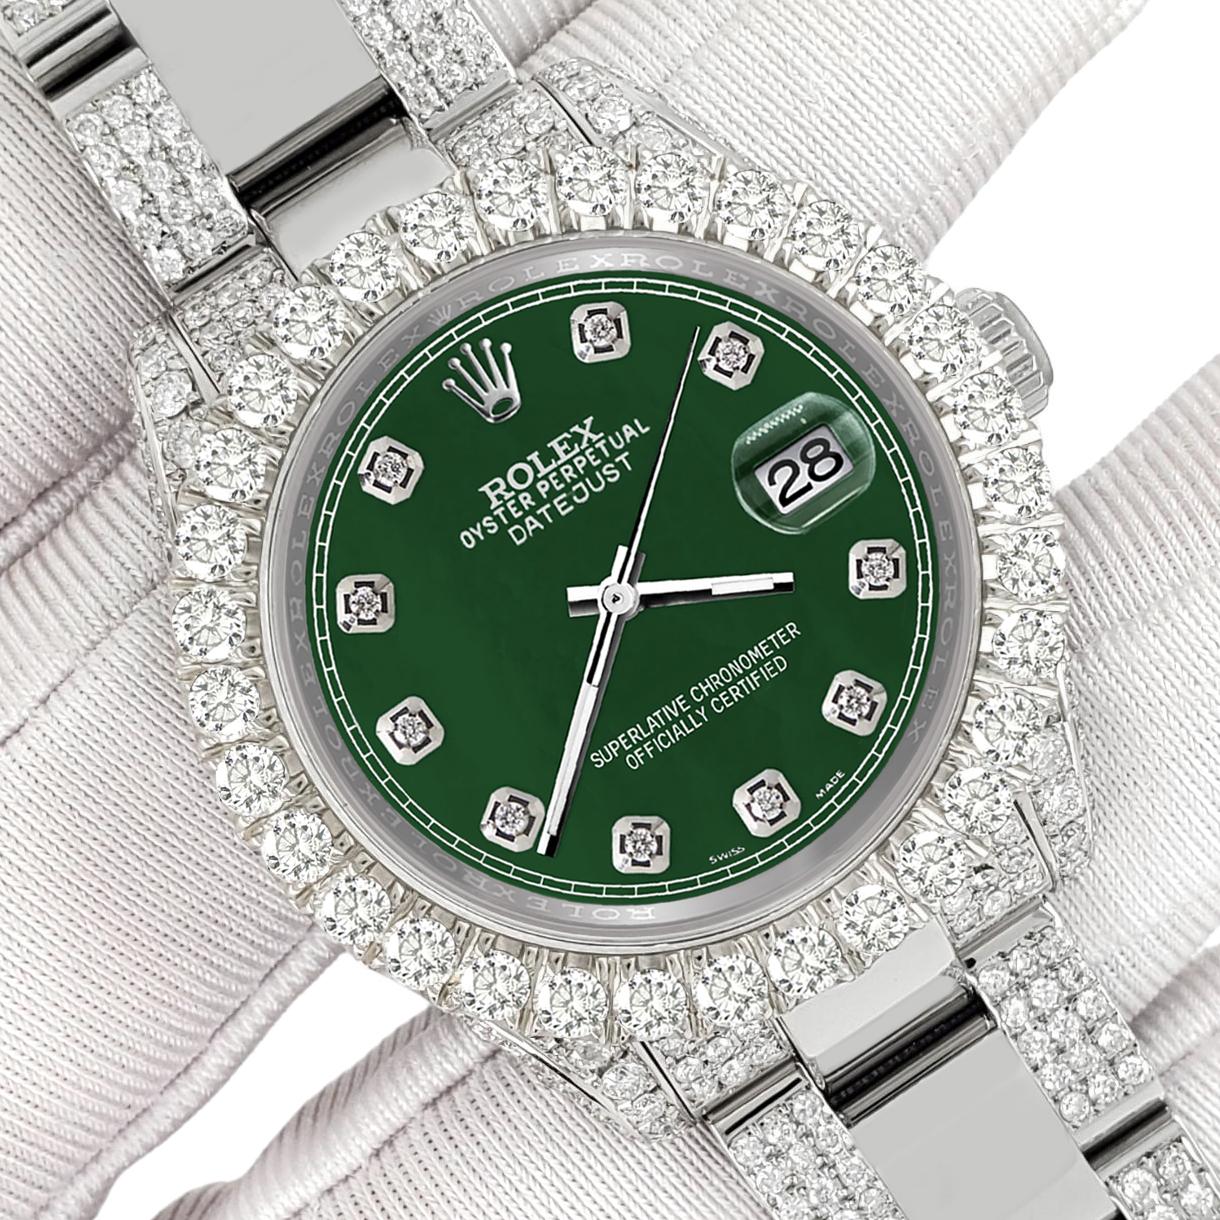 ElegantSwiss Watch Co is delighted to offer you this Rolex Datejust Midsize 31mm Pave 7.2ct Iced Diamond Forest Green Track Dial Oyster Watch, Ref 178240.

Excellent, pristine condition, no signs of wear, works flawlessly, comes with Rolex box,